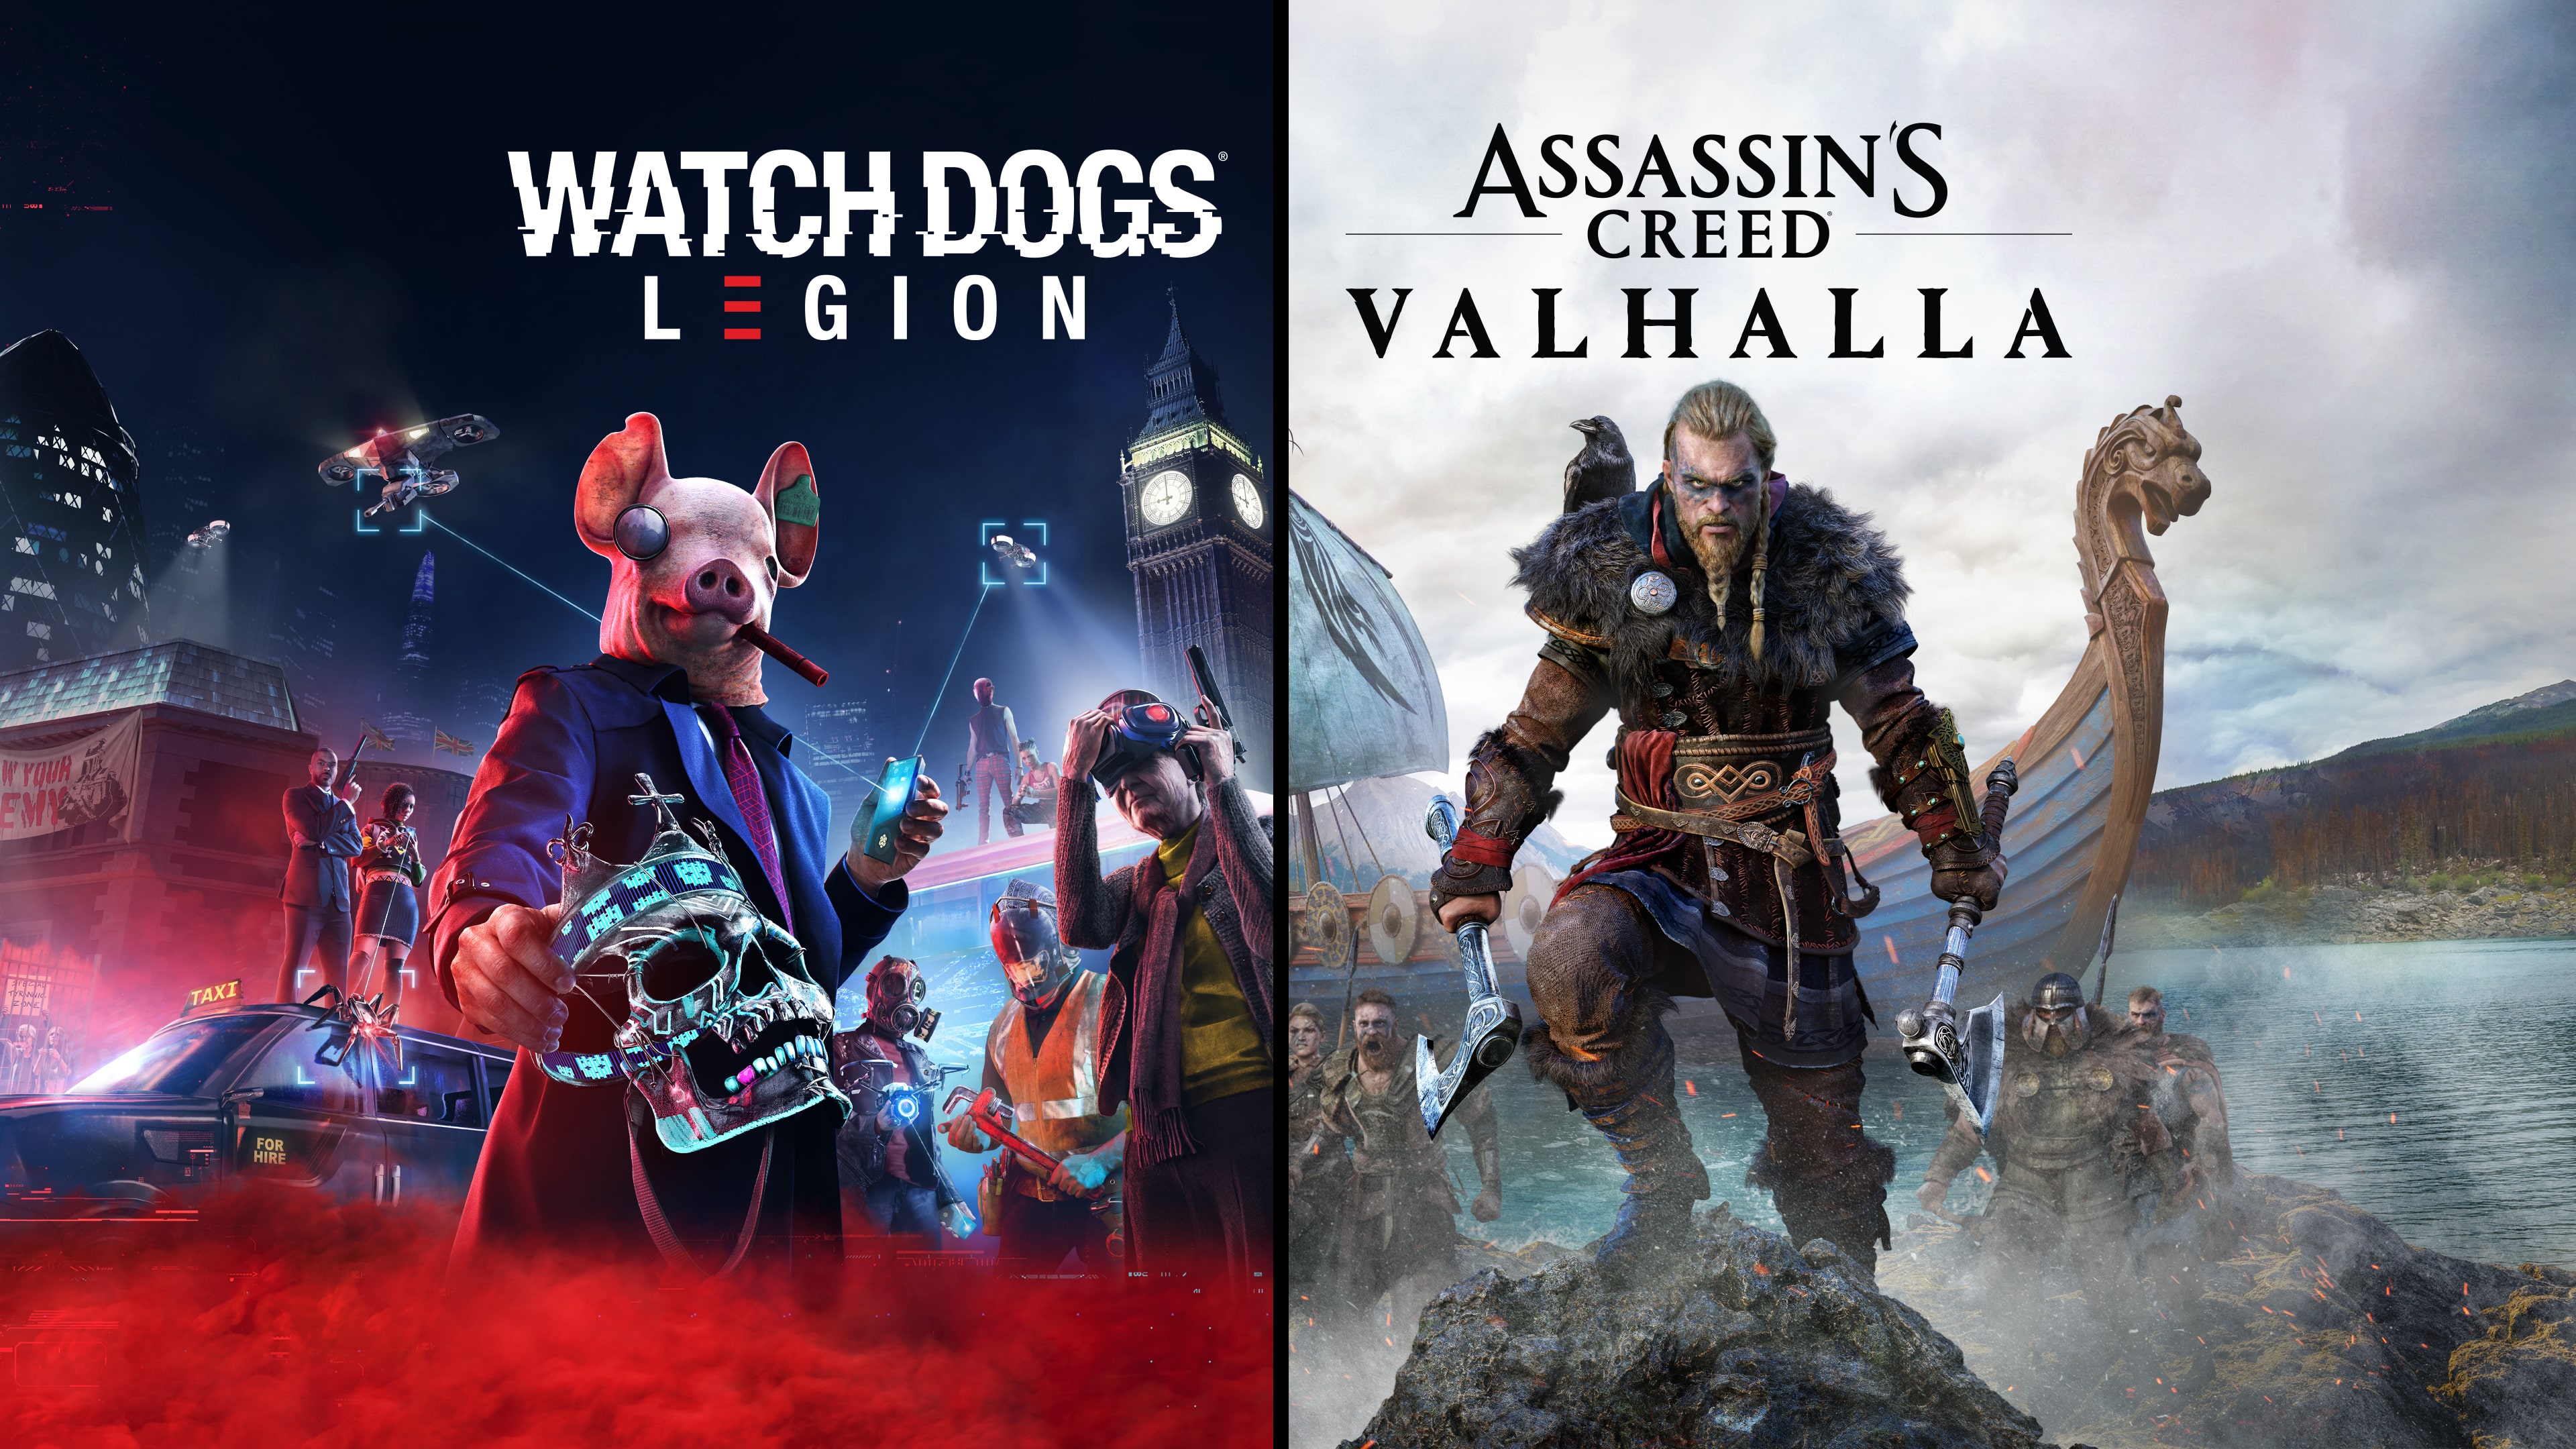 Assassin’s Creed® Valhalla + Watch Dogs®: Legion Bundle (Simplified Chinese, English, Korean, Japanese, Traditional Chinese)